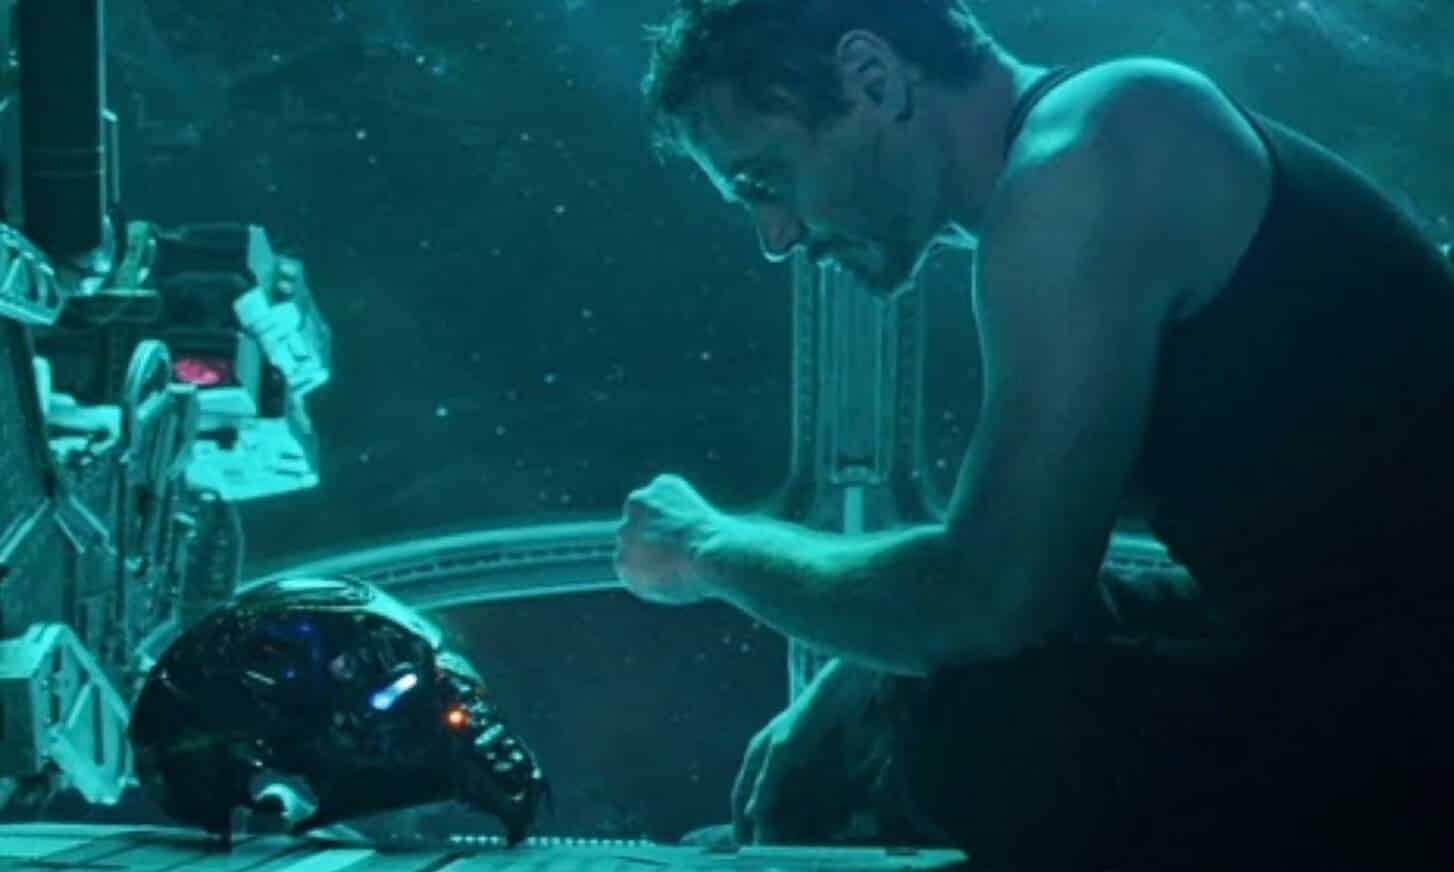 Robert Downey Jr. as Iron Man in Avengers Endgame, which is an Avengers movie called Avengers Endgame with Robert Downey Jr. as Iron Man.